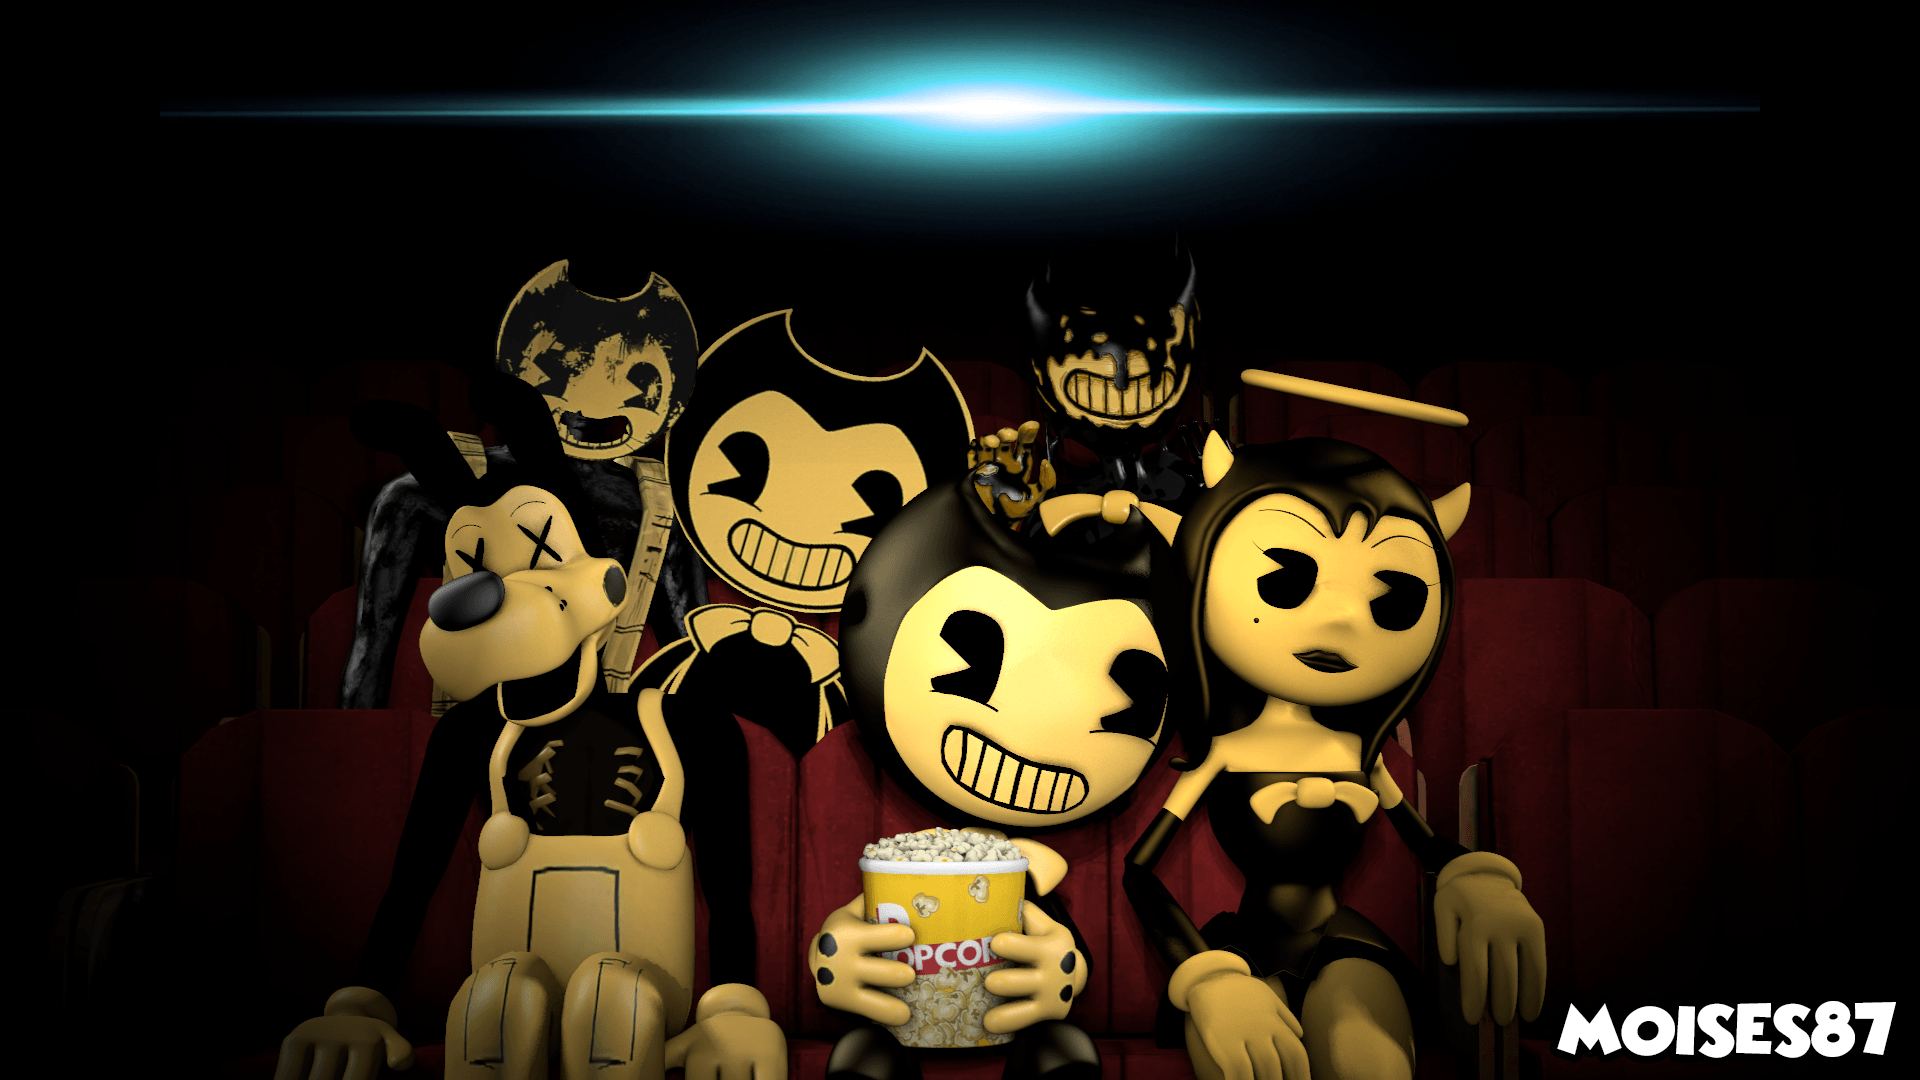 Bendy And The Ink Machine Wallpaper 1920x1080 Bendy